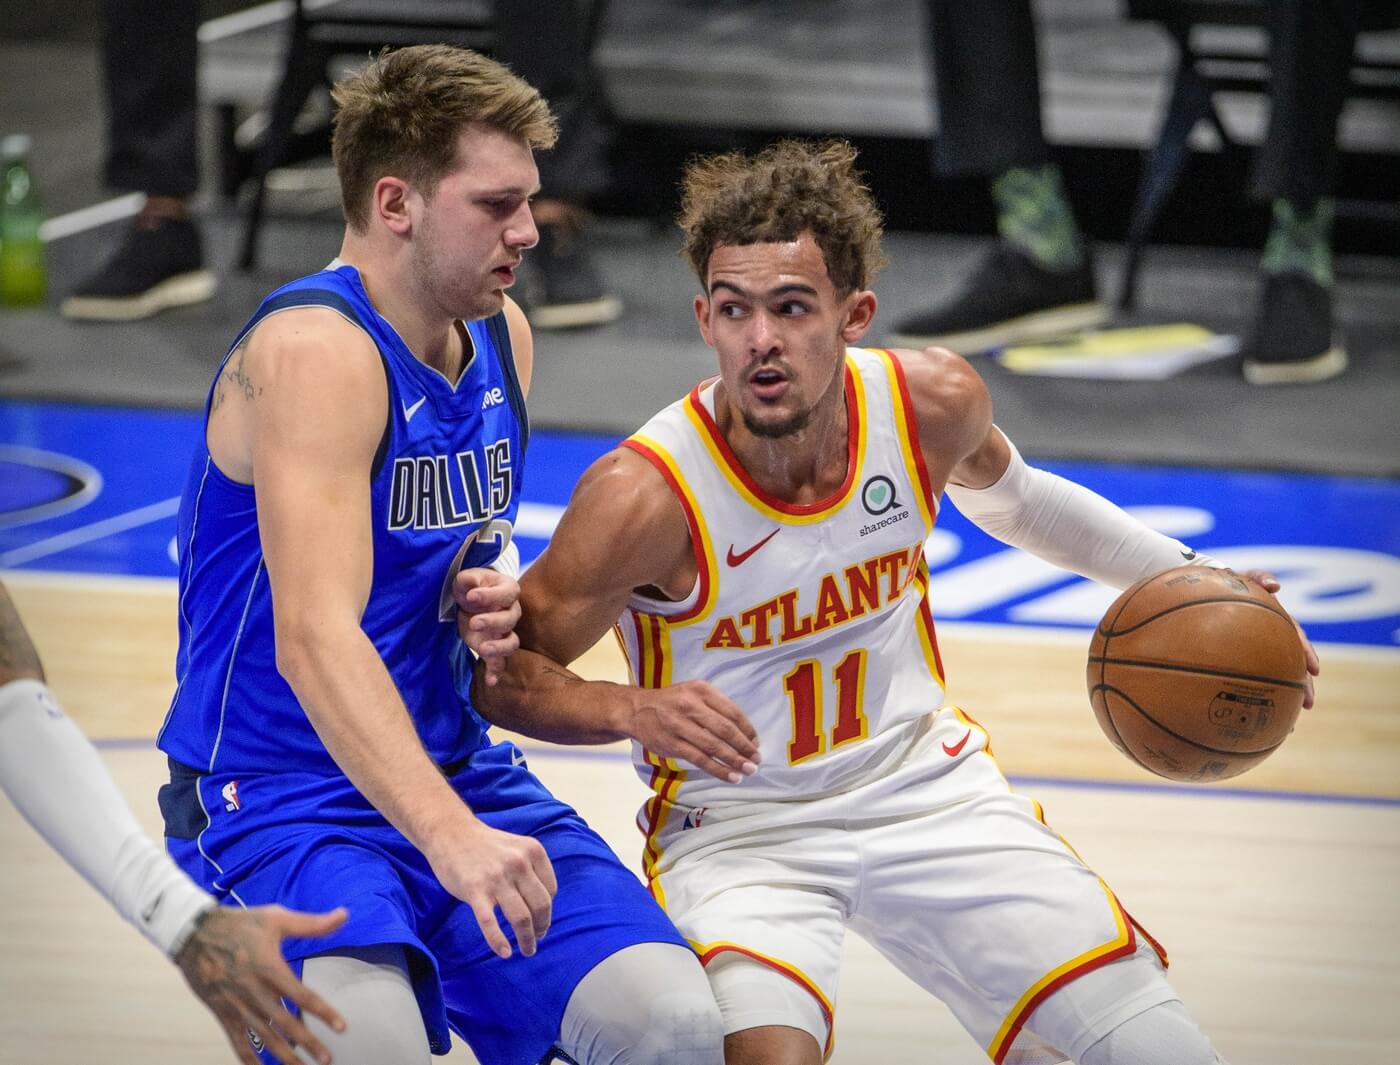 Feb 10, 2021; Dallas, Texas, USA; Dallas Mavericks guard Luka Doncic (77) defends against Atlanta Hawks guard Trae Young (11) during the first quarter at the American Airlines Center. Mandatory Credit: Jerome Miron-USA TODAY Sports